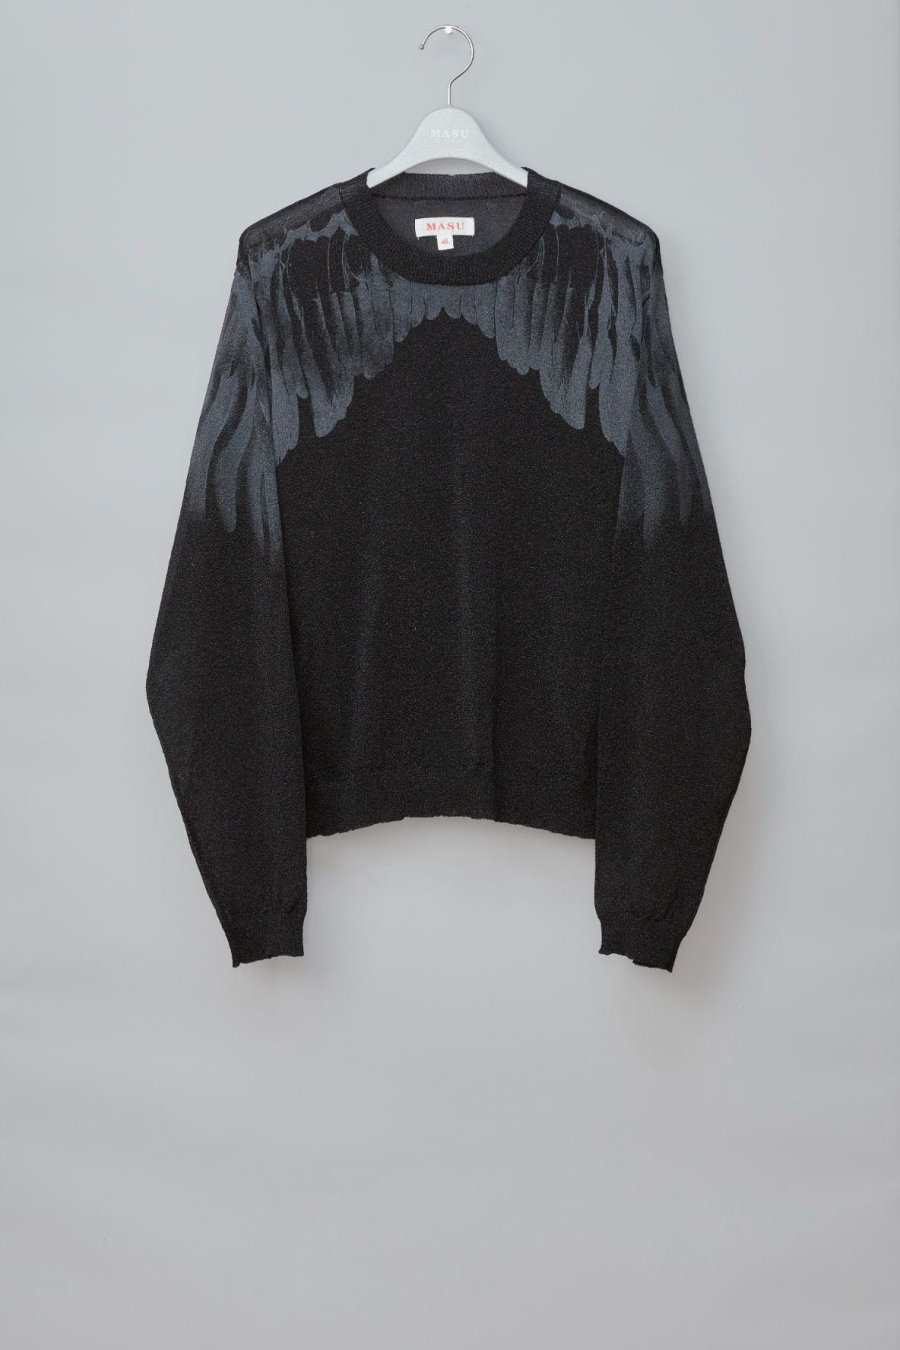 MASU  CLEAR ANGEL WING SWEATER(CLEAR BLACK)<img class='new_mark_img2' src='https://img.shop-pro.jp/img/new/icons15.gif' style='border:none;display:inline;margin:0px;padding:0px;width:auto;' />